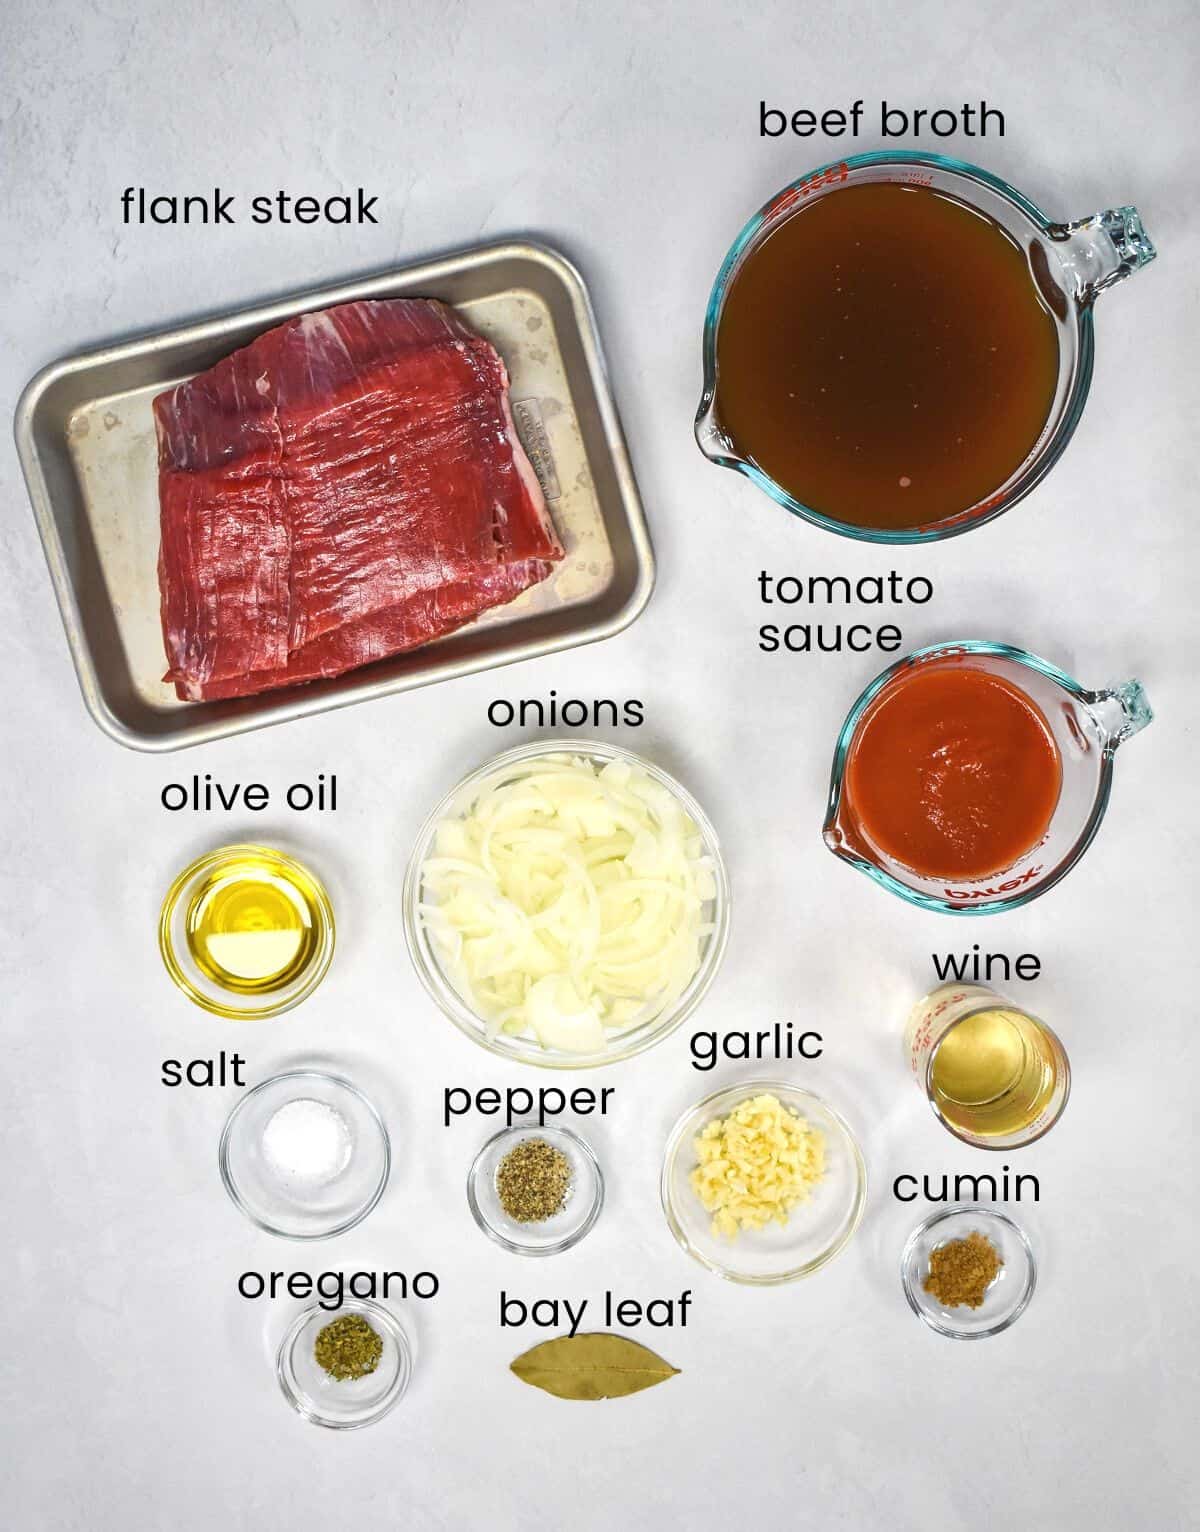 The ingredients for the dish arranged on a white table with each one labeled with black letters.